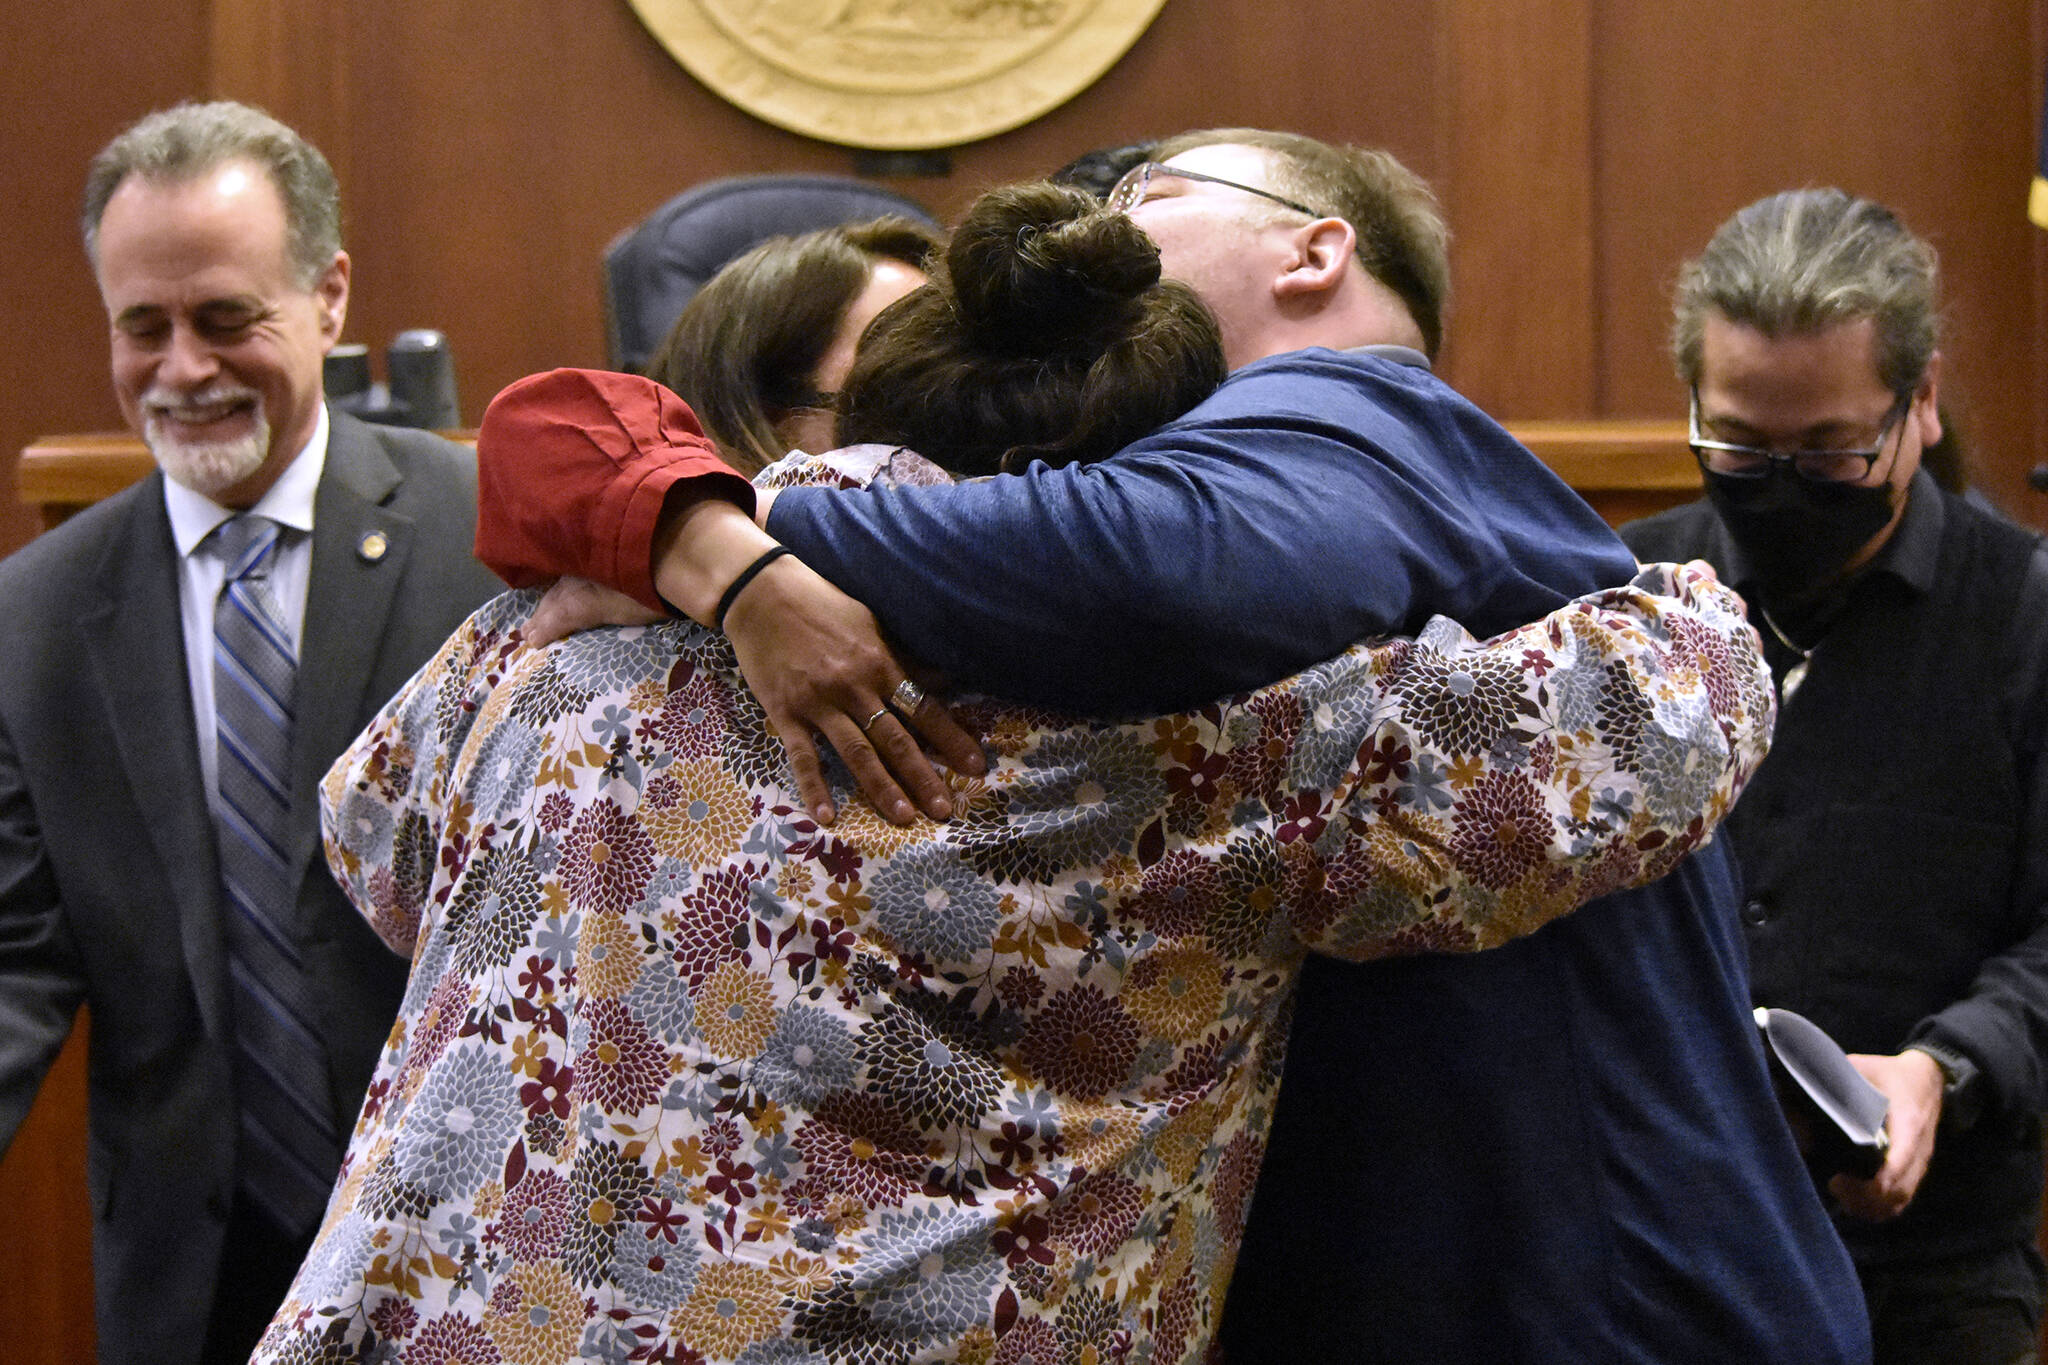 Alaskans for Better Government members La quen náay Liz Medicine Crow, Richard Chalyee Éesh Peterson and ‘Wáahlaal Gidáak Barbara Blake embrace on the floor of the Alaska State Senate on Friday, May 13, 2022, following the passage of House Bill 123, a bill to formally recognize the state's 229 already federally-recognized tribes. (Peter Segall / Juneau Empire)